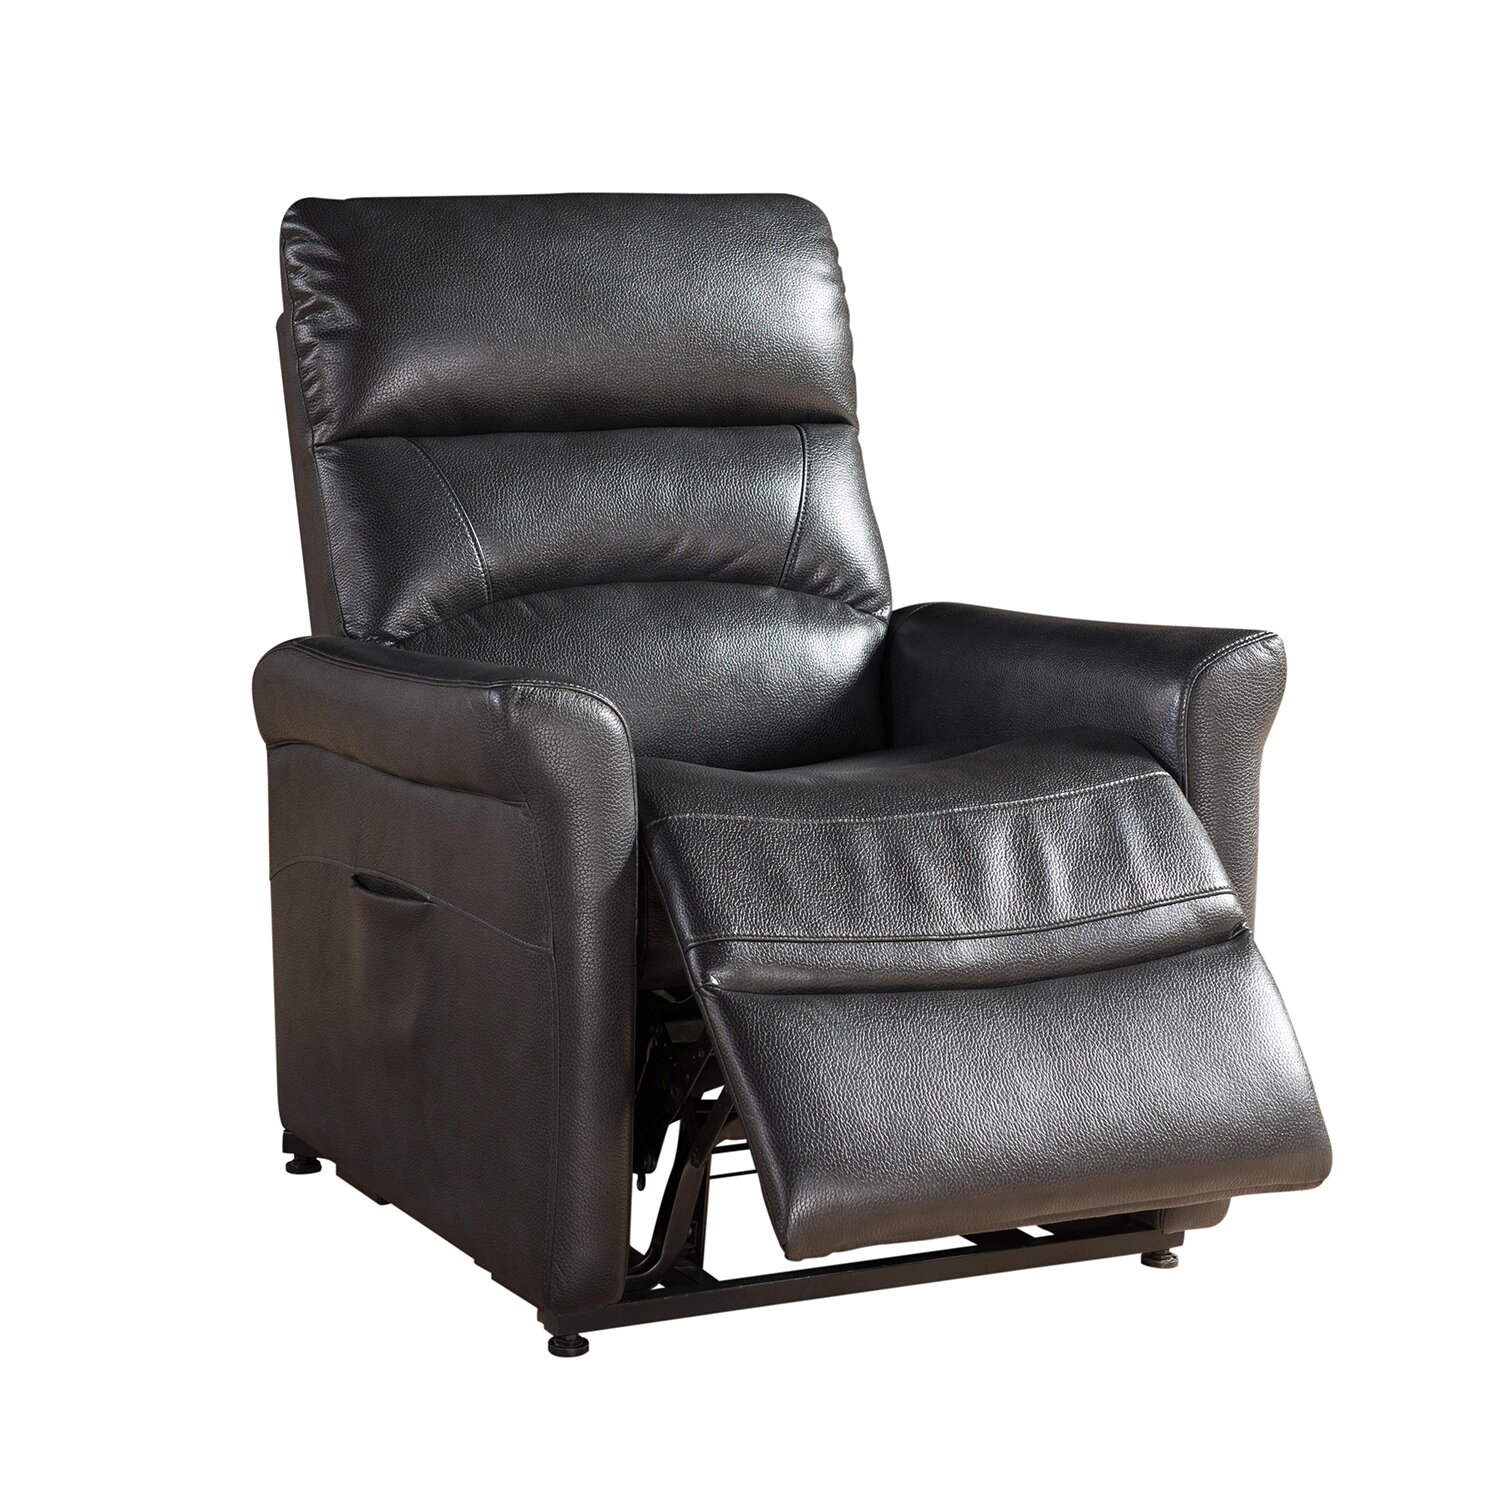 AC Pacific Colby Large Power Reclining Lift Chair | Wayfair.ca